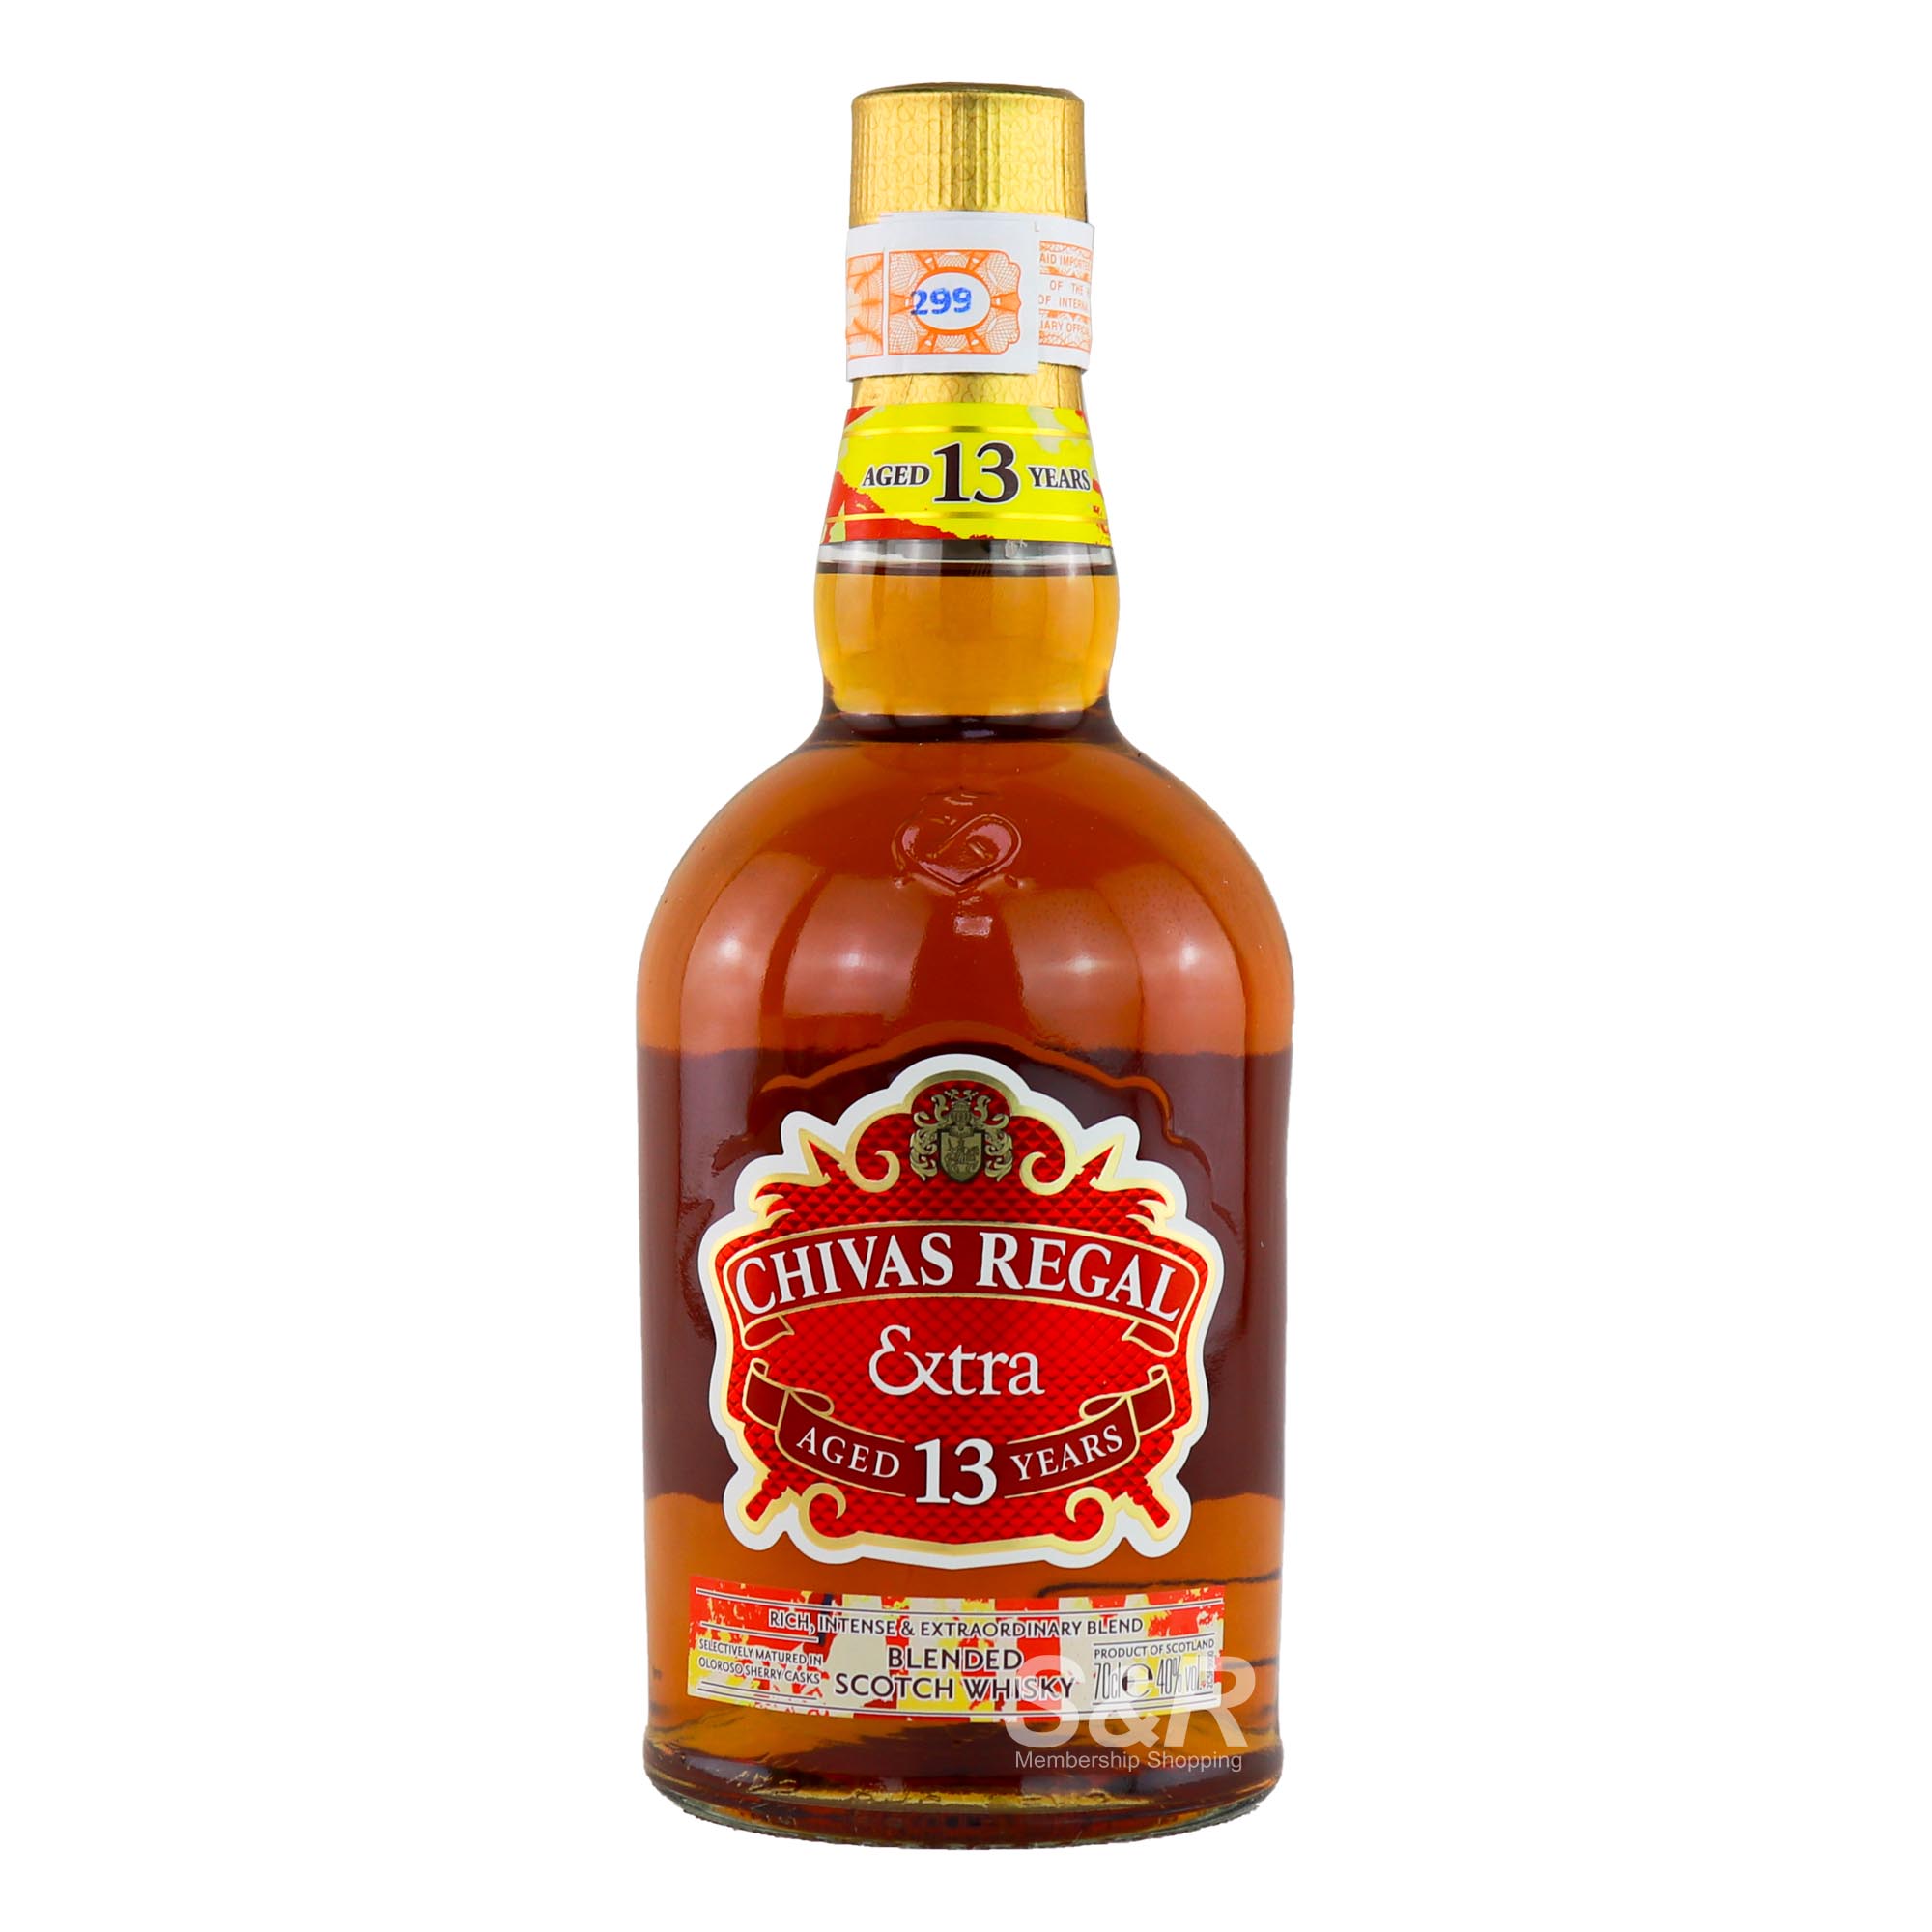 Chivas Regal Extra Aged 13 Years Sherry Cask Blended Scotch Whisky 700mL